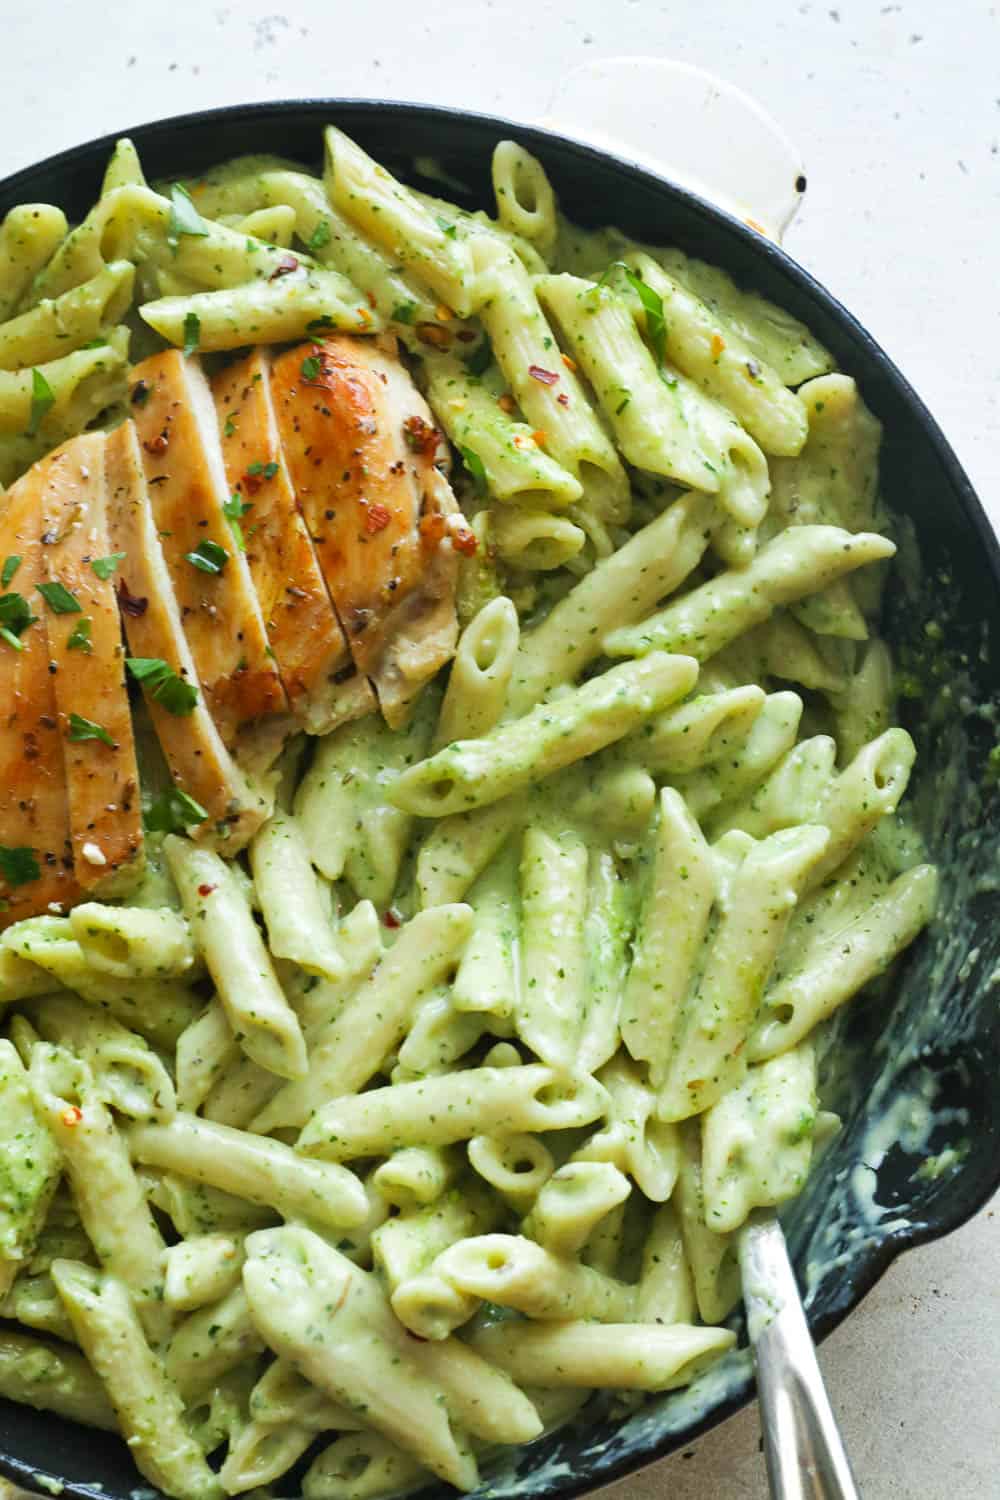 Enjoy! Chicken Pesto Pasta from from the stovetop